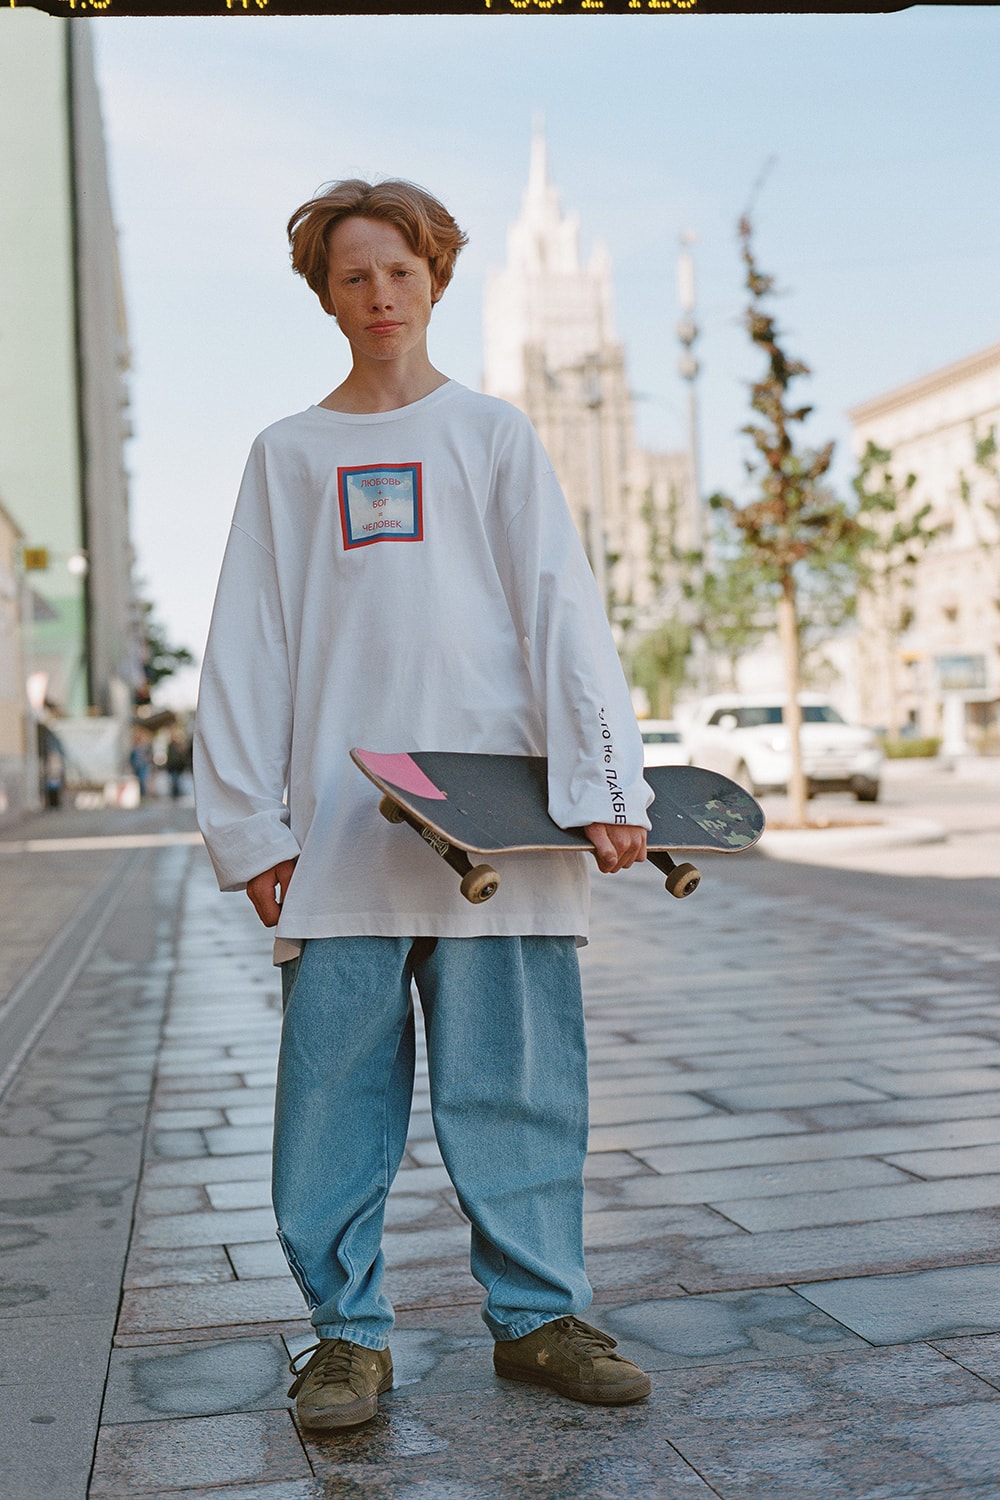 PACCBET Rassvet Winter 2018 Collection Gosha Rubchinskiy Moscow Skate Store Release Date For Sale Availbility